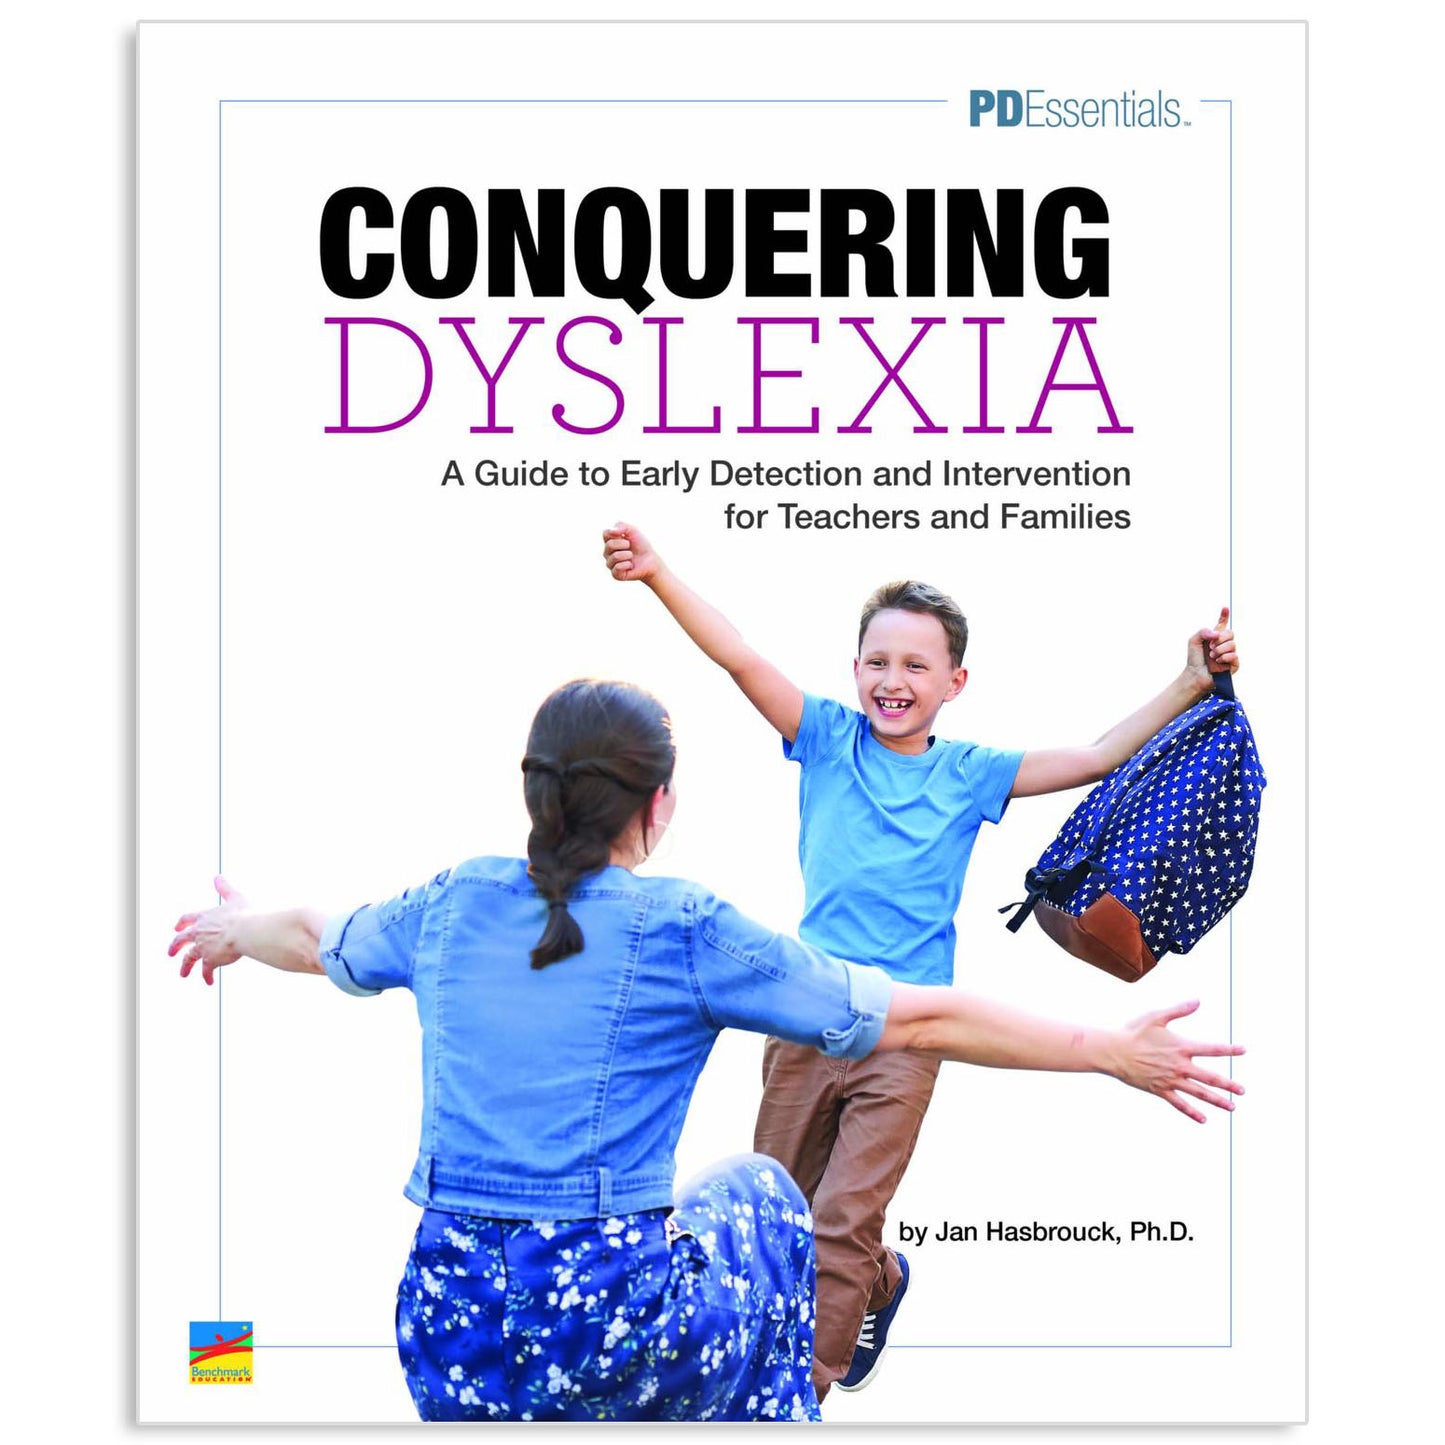 Conquering Dyslexia: A Guide to Early Detection and Prevention for Teachers and Families